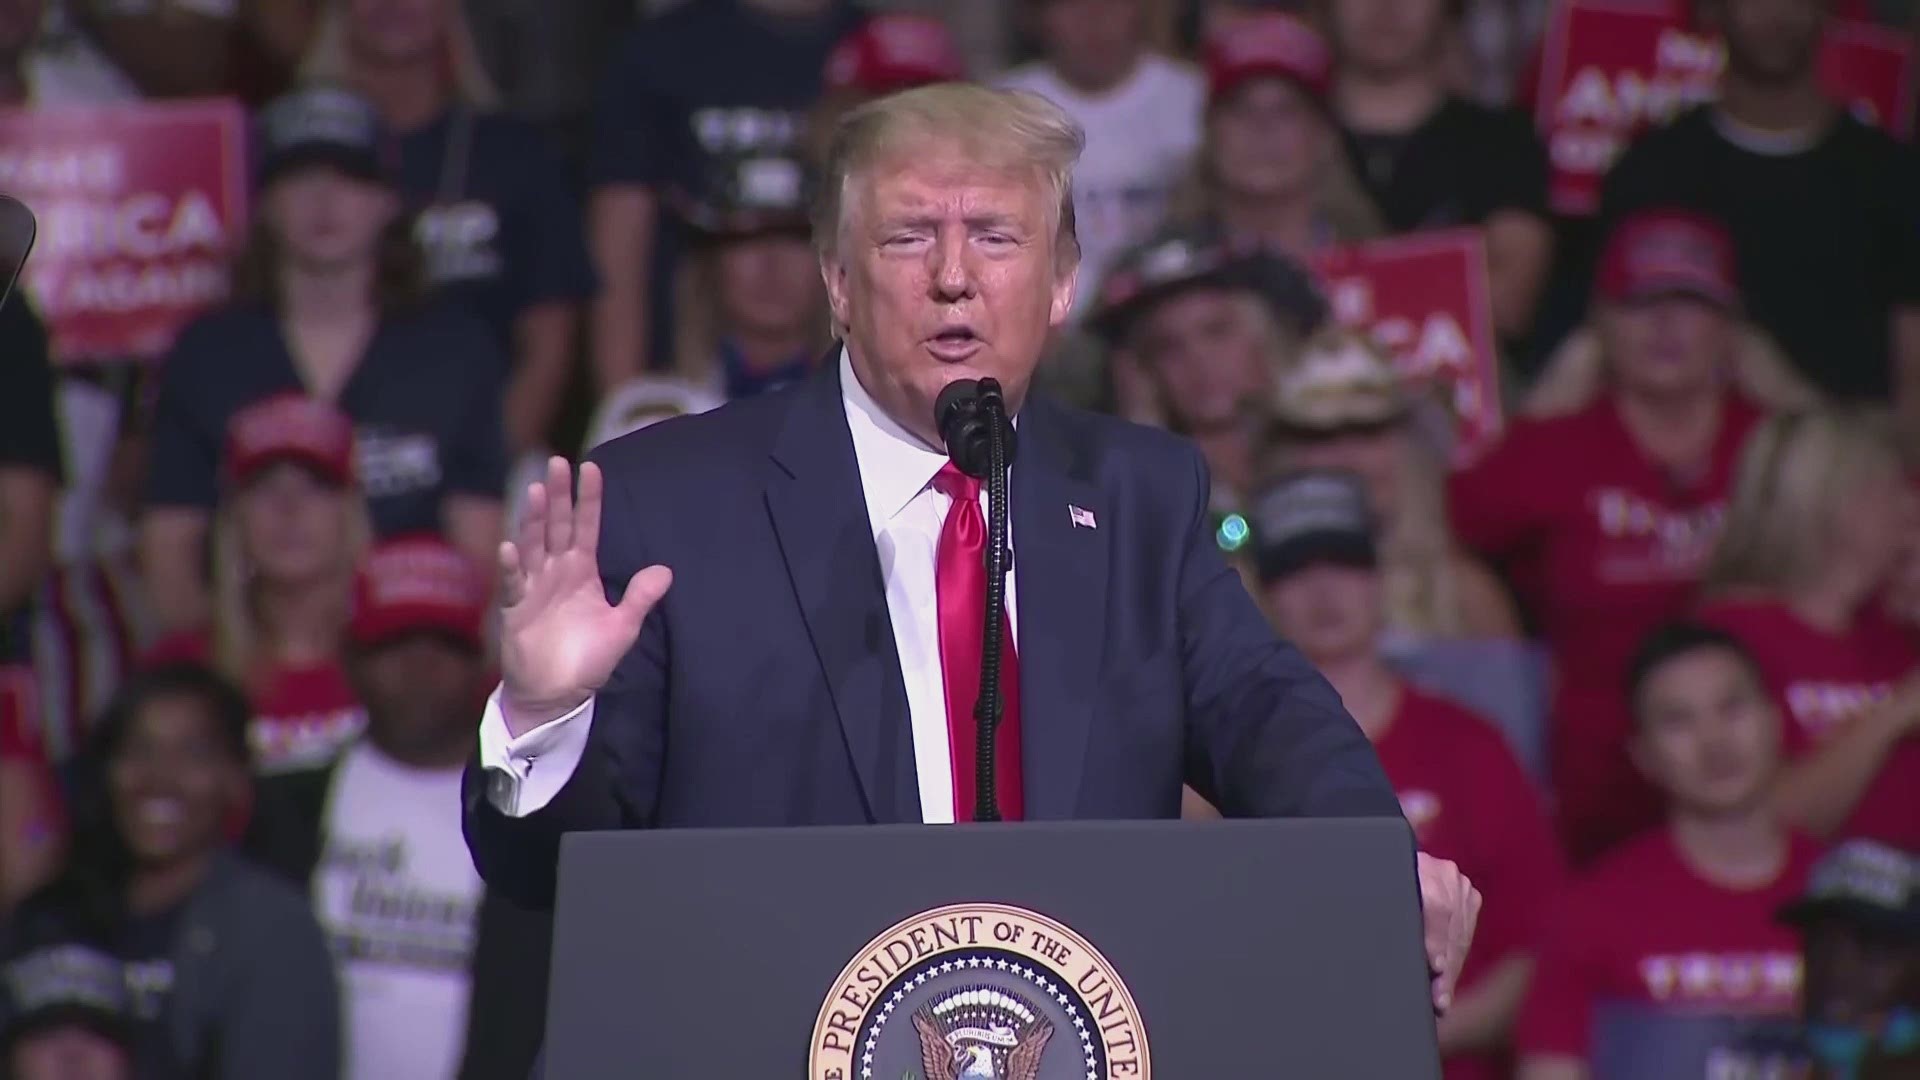 Speaking about COVID-19 at his Tulsa, Oklahoma, rally, President Donald Trump said he told his people "to slow the testing down, please."